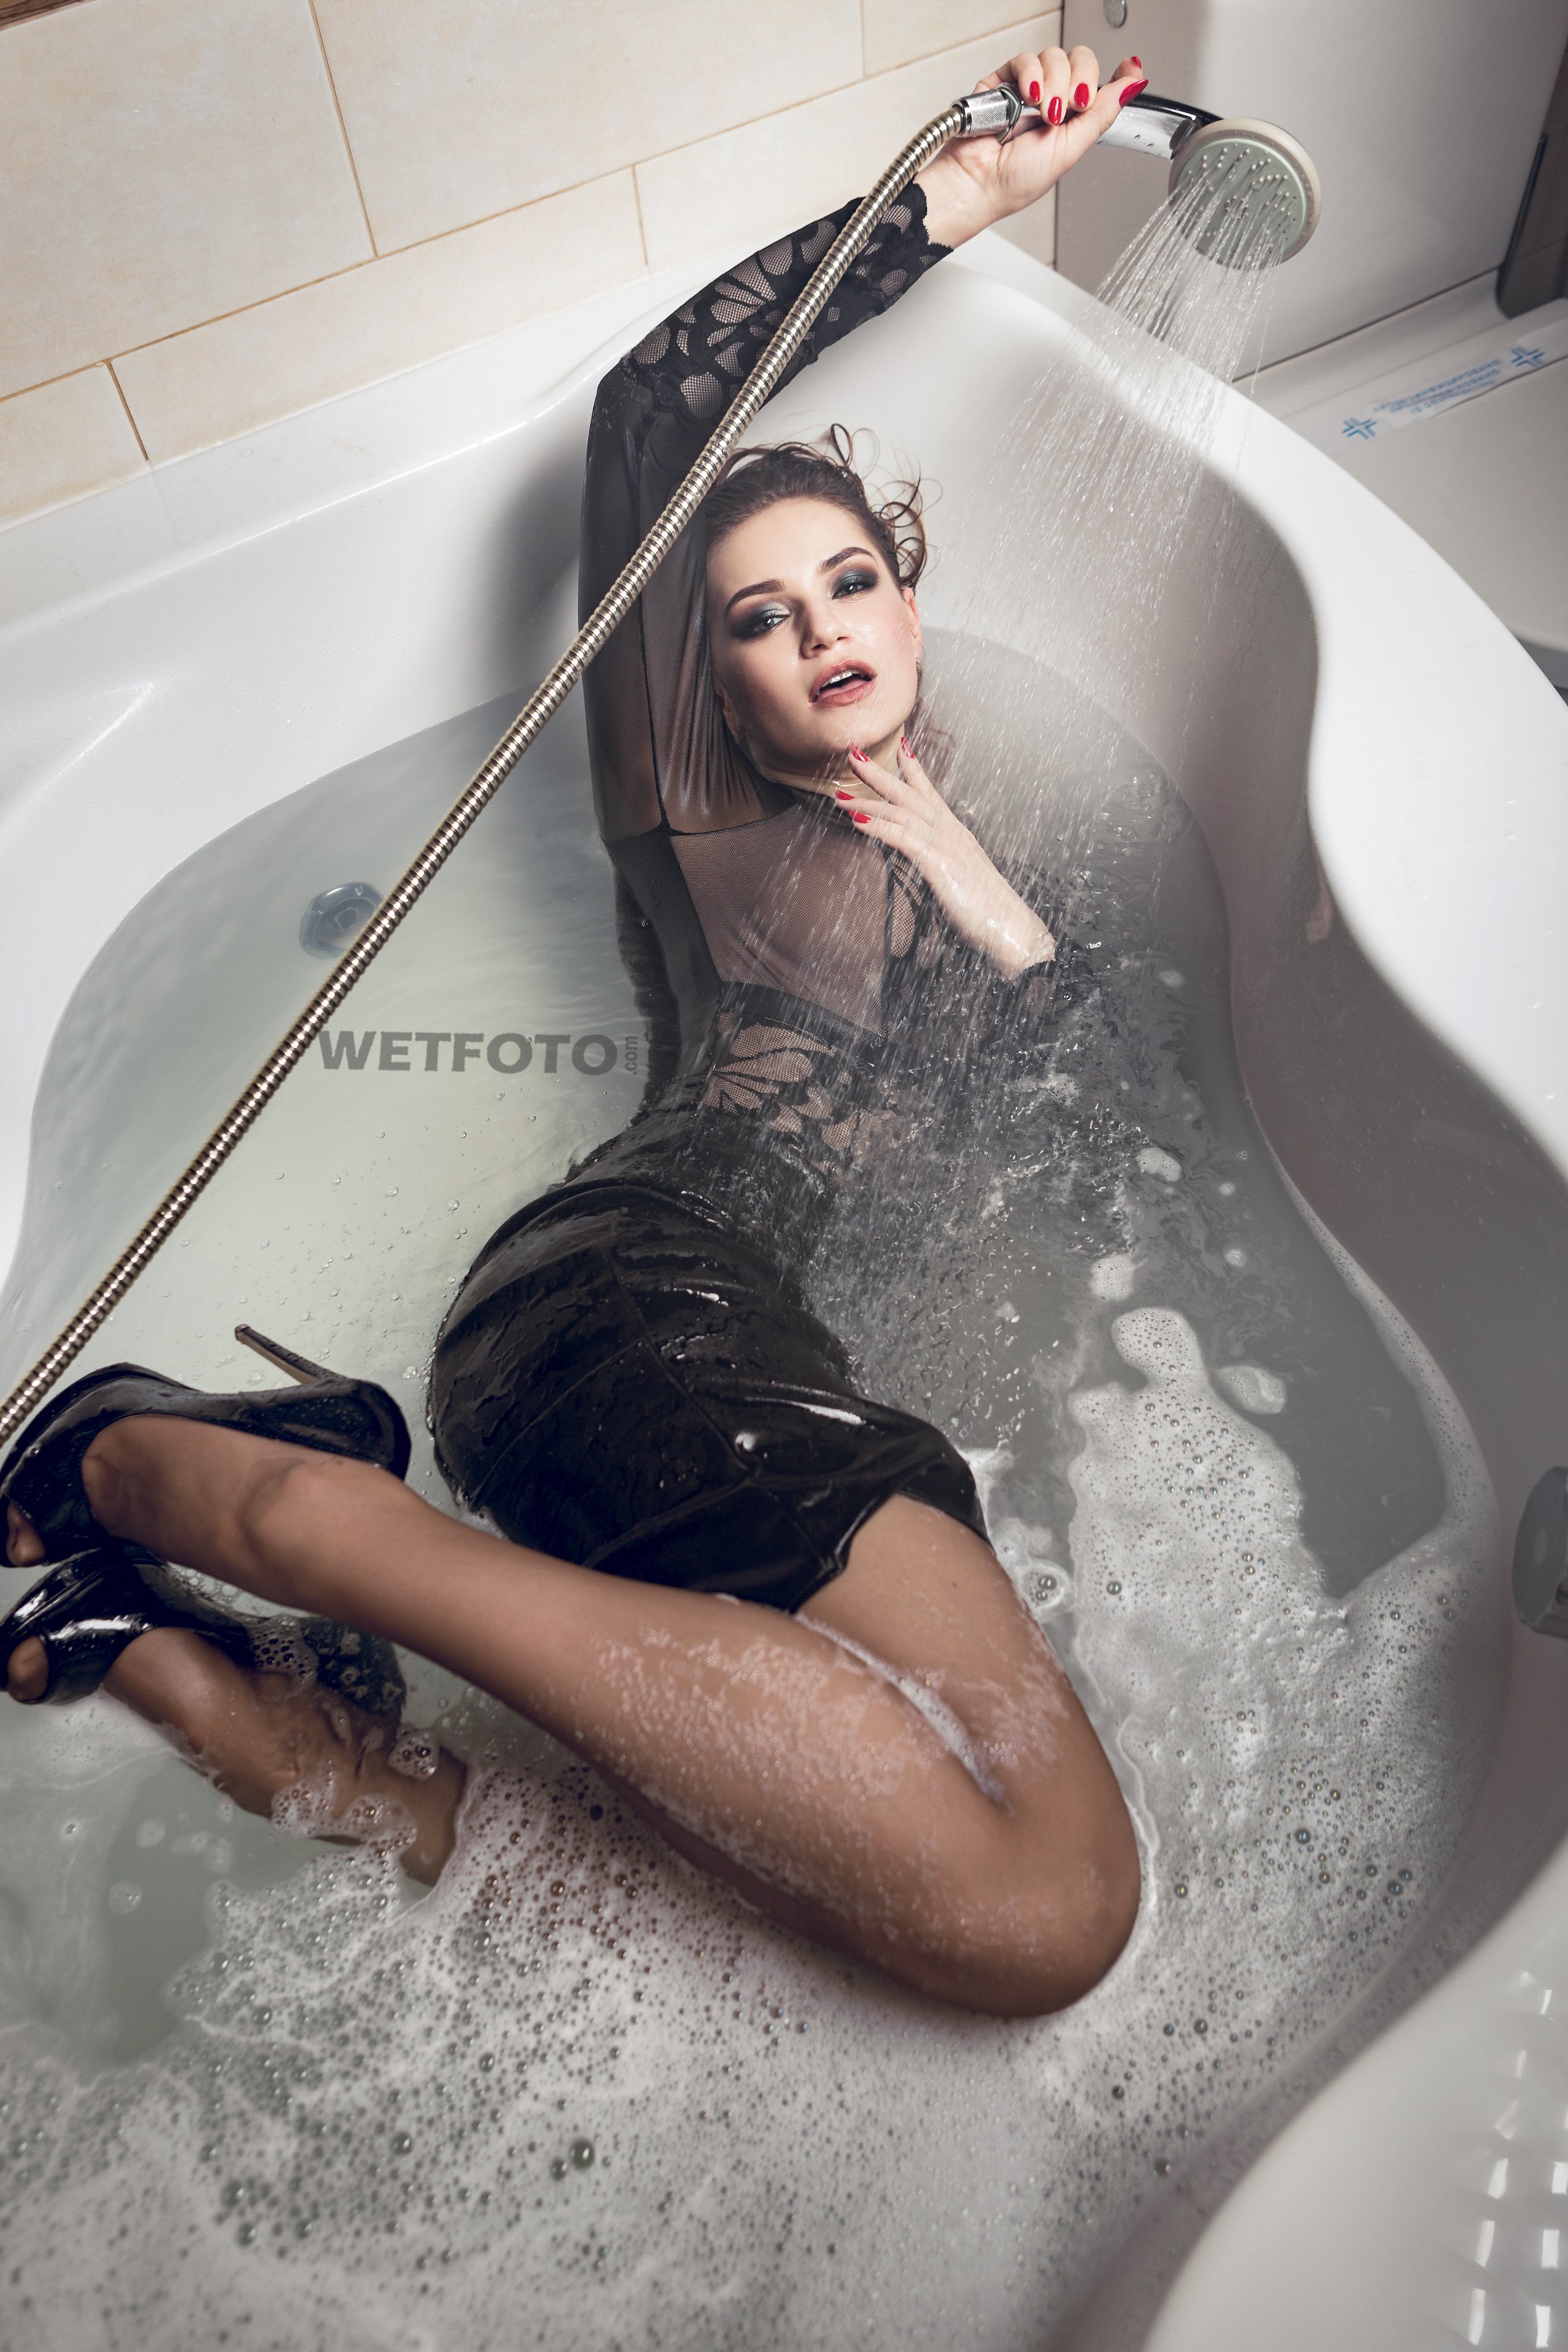 Let me introduce you our... http://wetlook.one/wetlook/fully-clothed-wetloo...